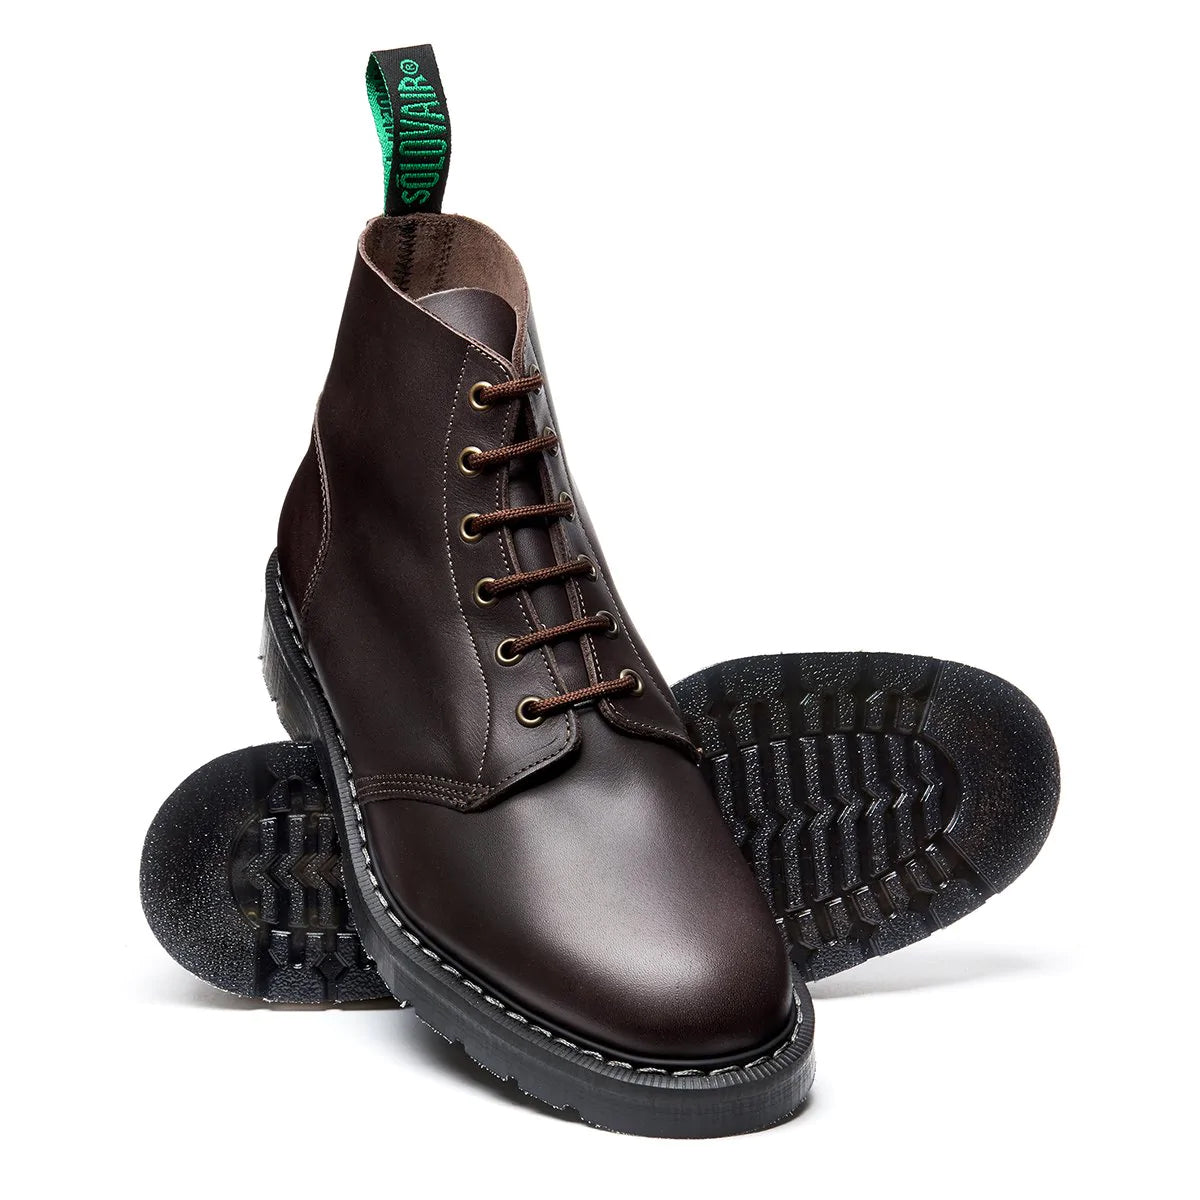 6-Eye Astronaut Boot DARK BROWN WAXY

Made in England
Over 140 years of Traditional Shoemaking Craftsmanship
Goodyear Welted Construction
Dark Brown Waxy Leather Upper
Leather &amp;amp; Synthetic Lining
Soft Suspension Classic Sole
 SOLOVAIR